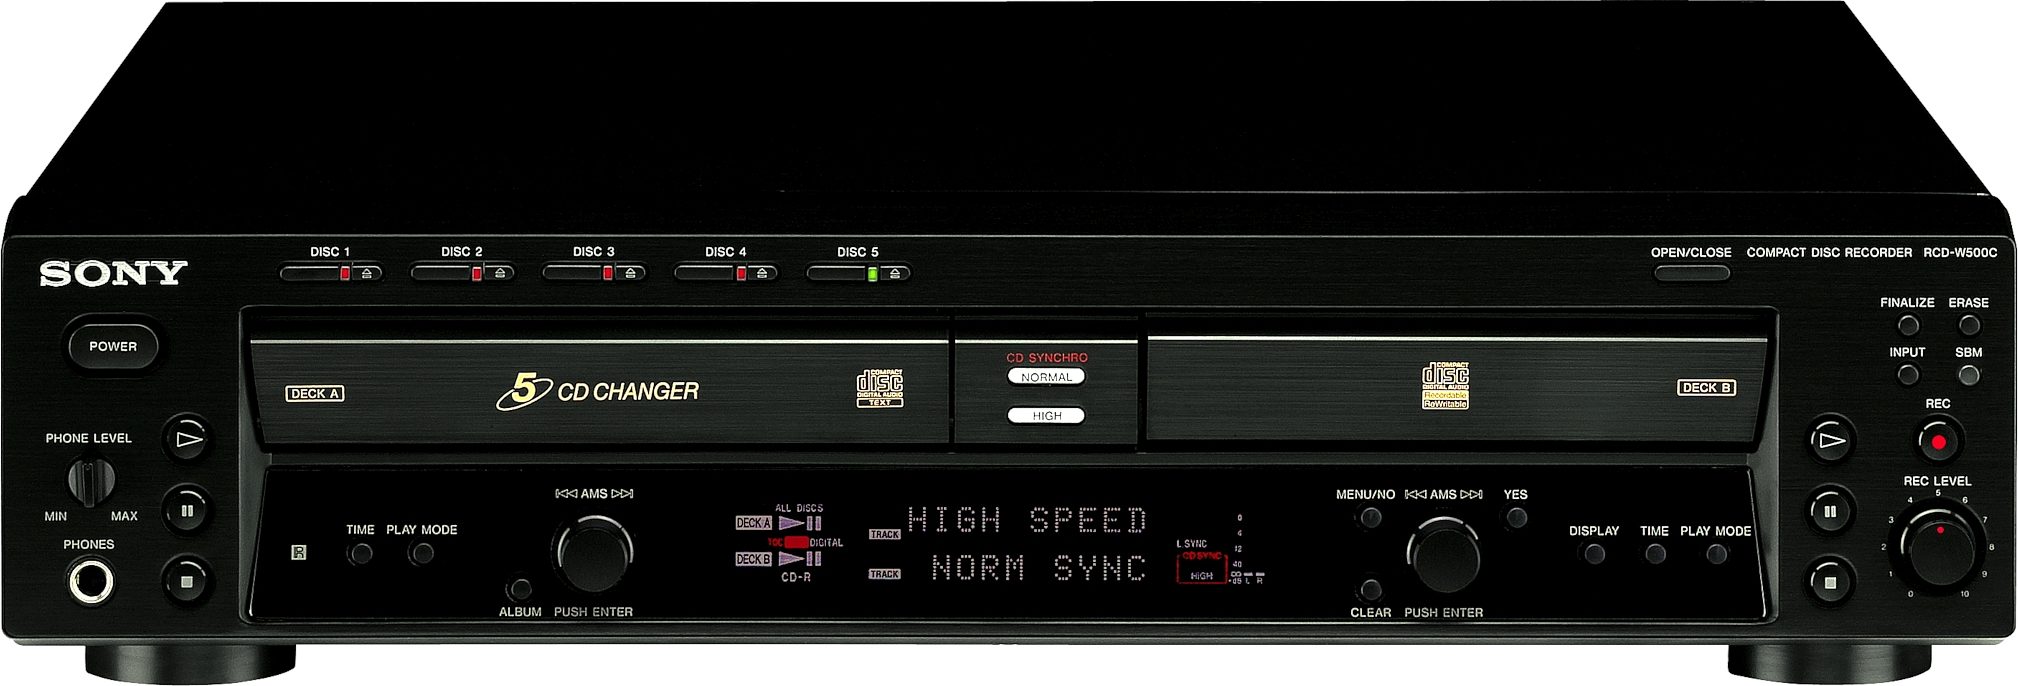 Sony RCD-W500C CD Recorder and Player zZounds